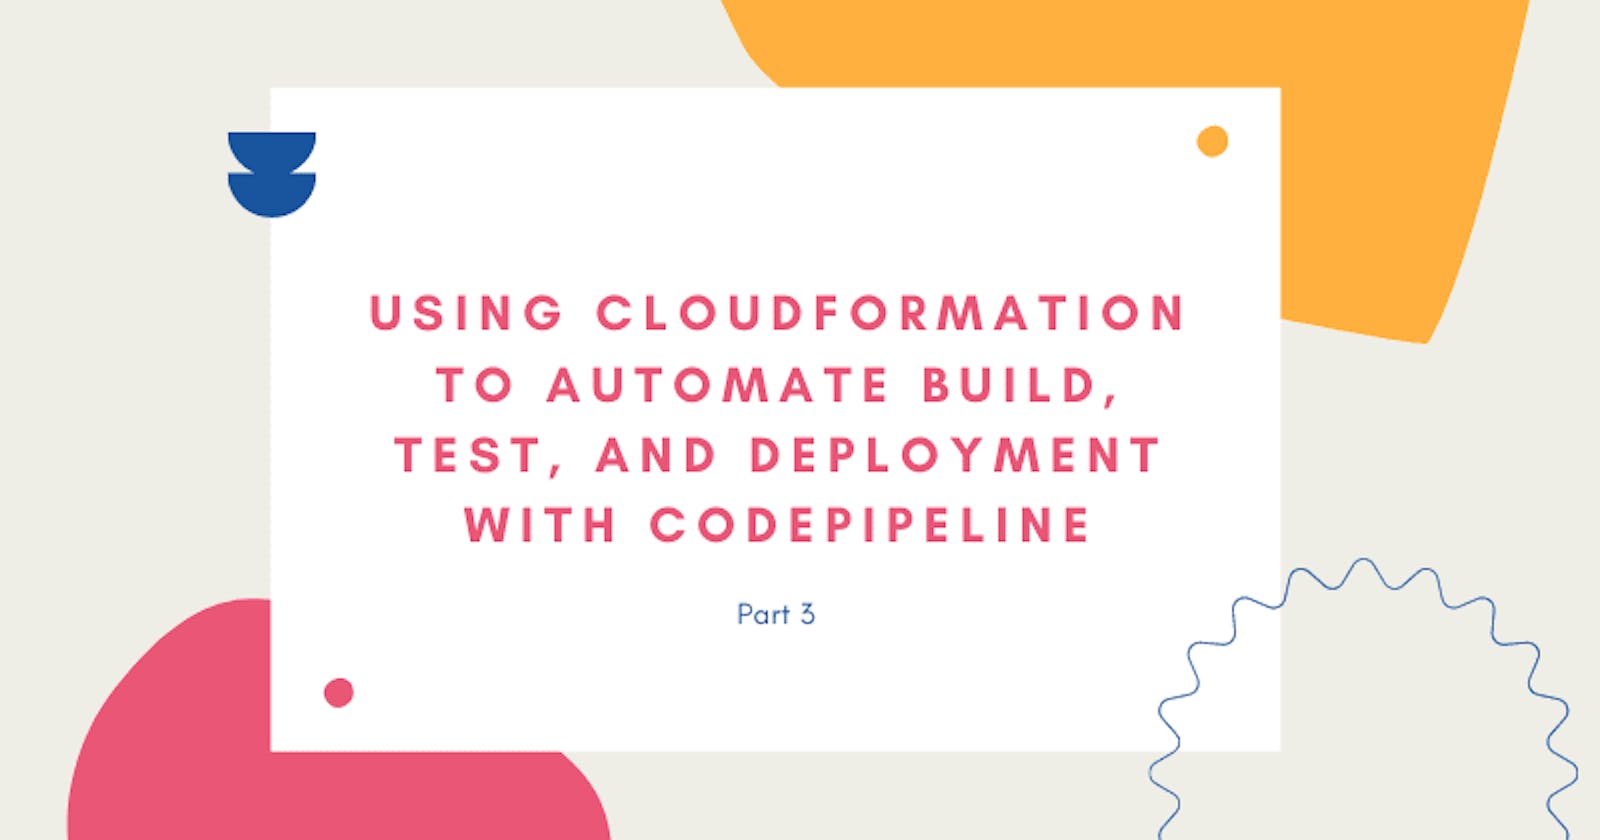 Using CloudFormation to Automate Build, Test, and Deploy with CodePipeline